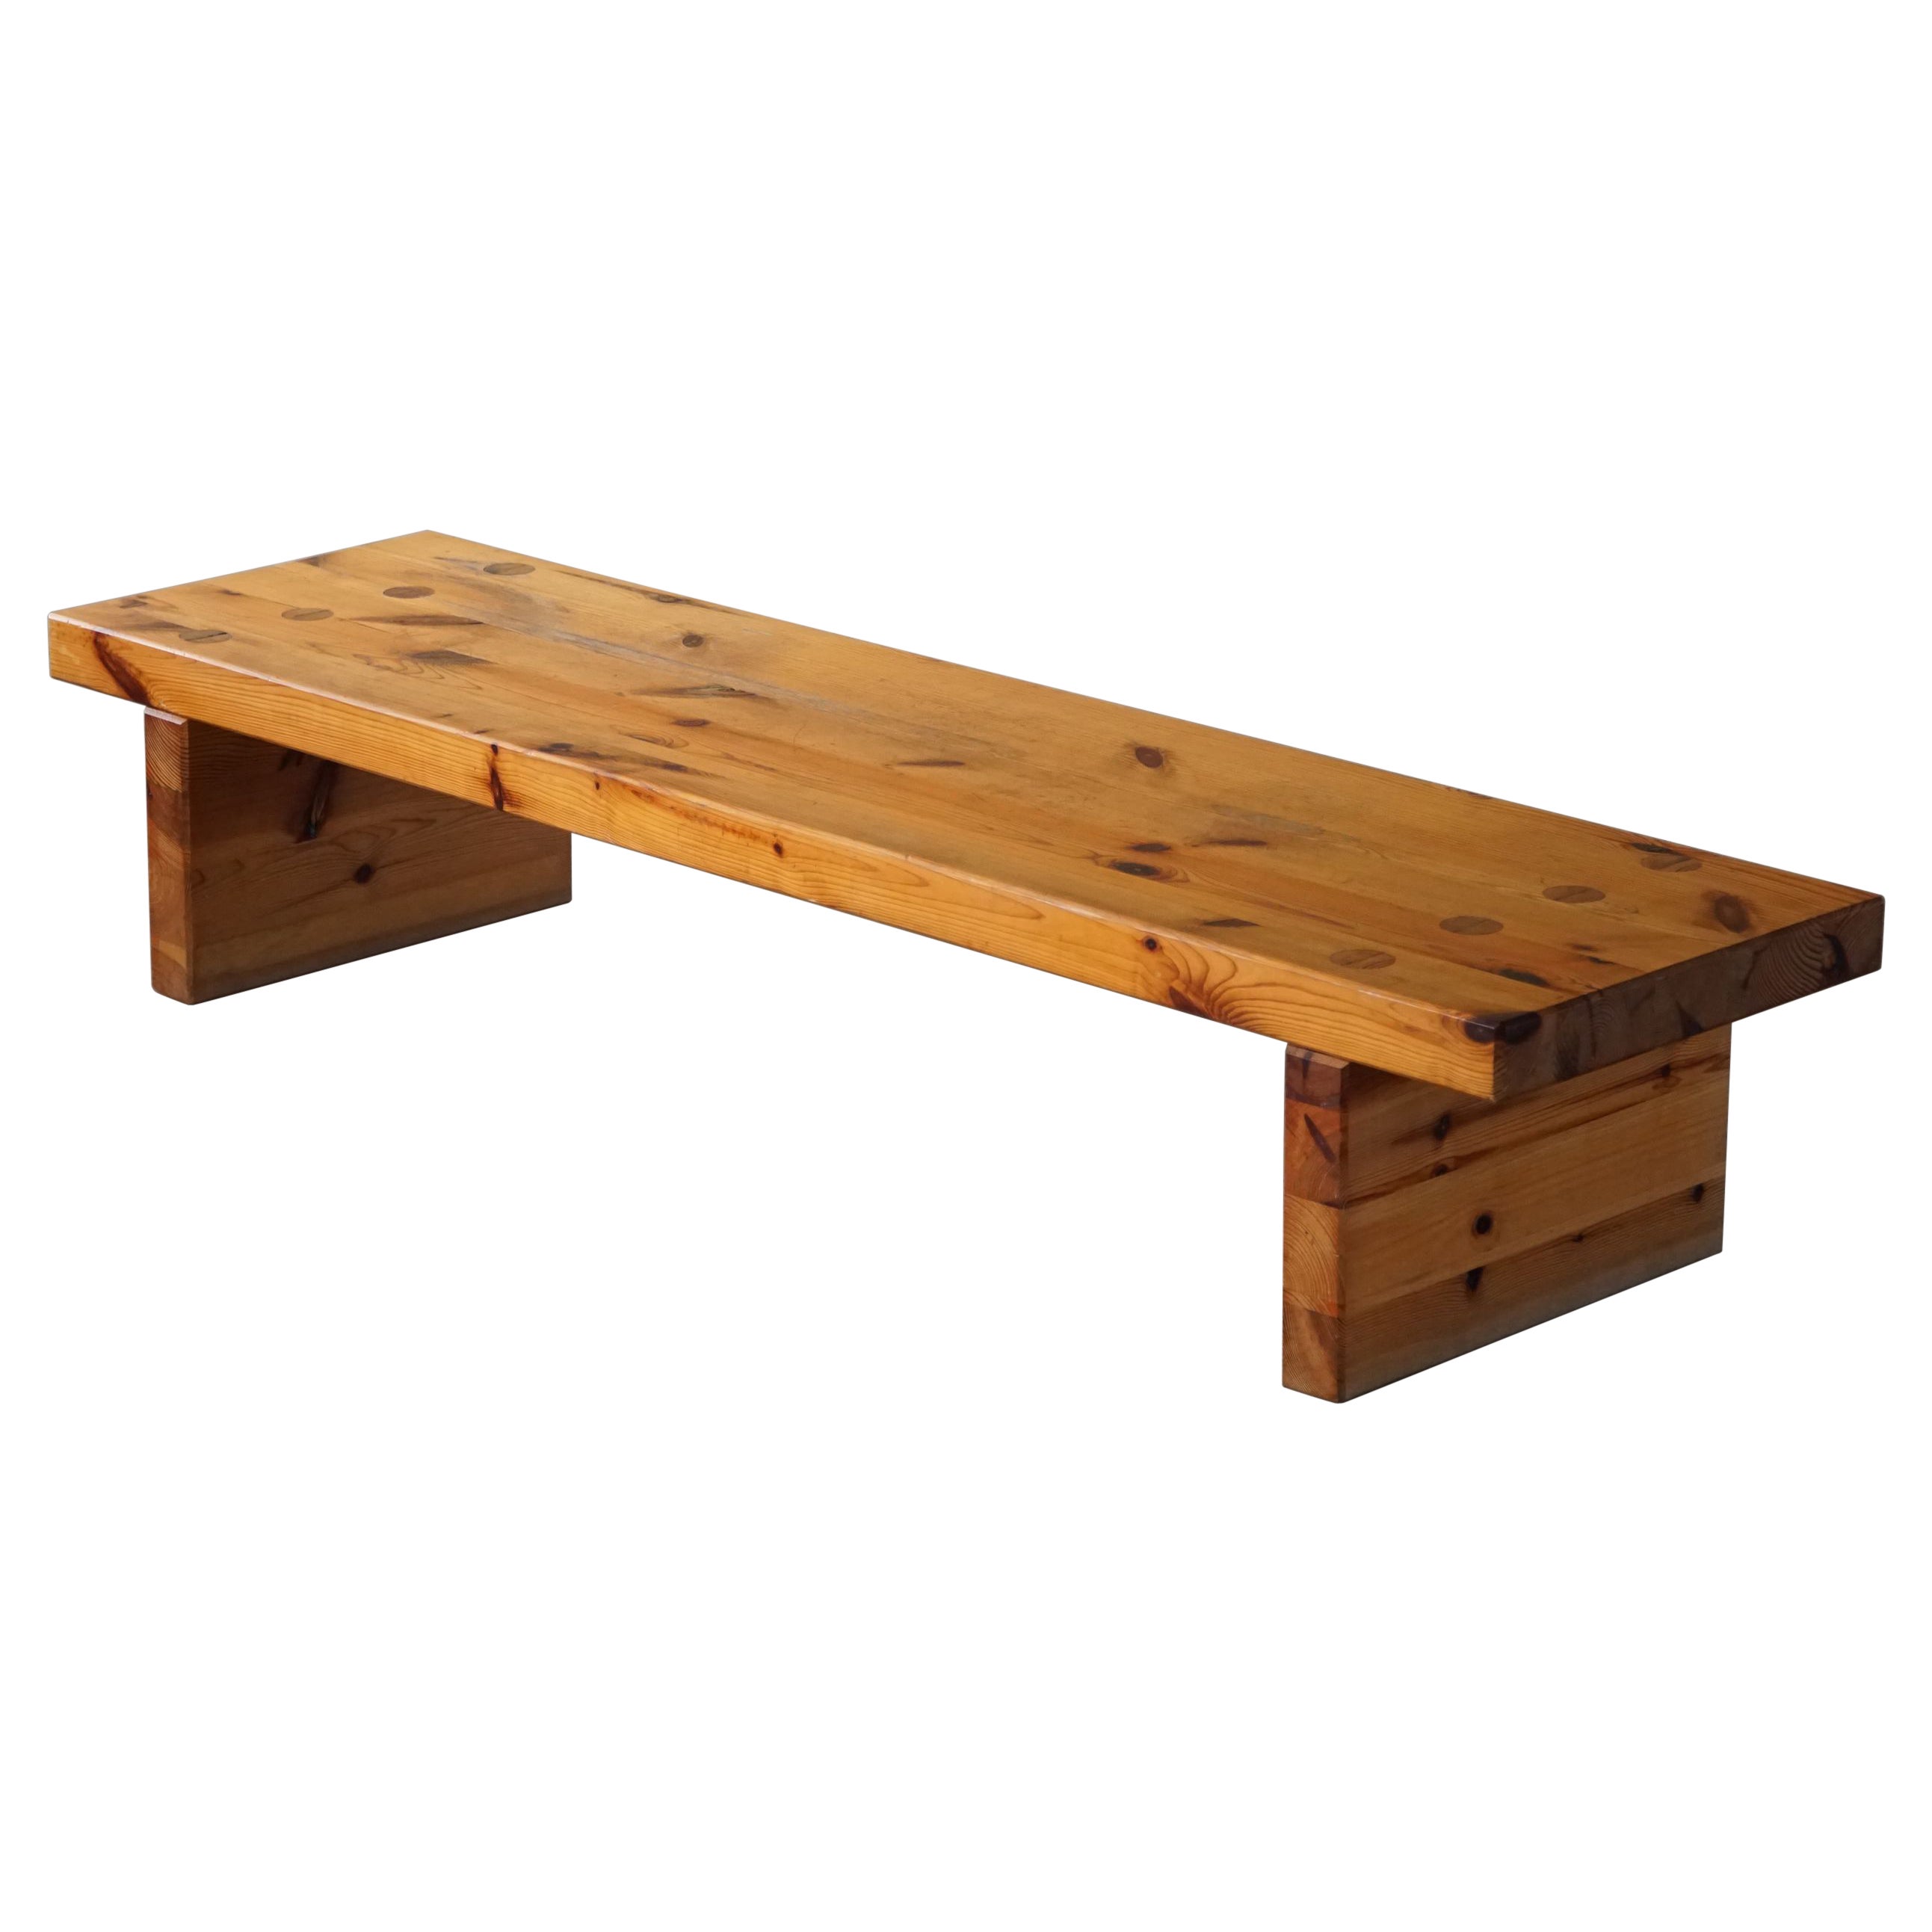 Sven Larsson, Solid Pine Bench / Coffee Table, Swedish Modern, Made in 1970s